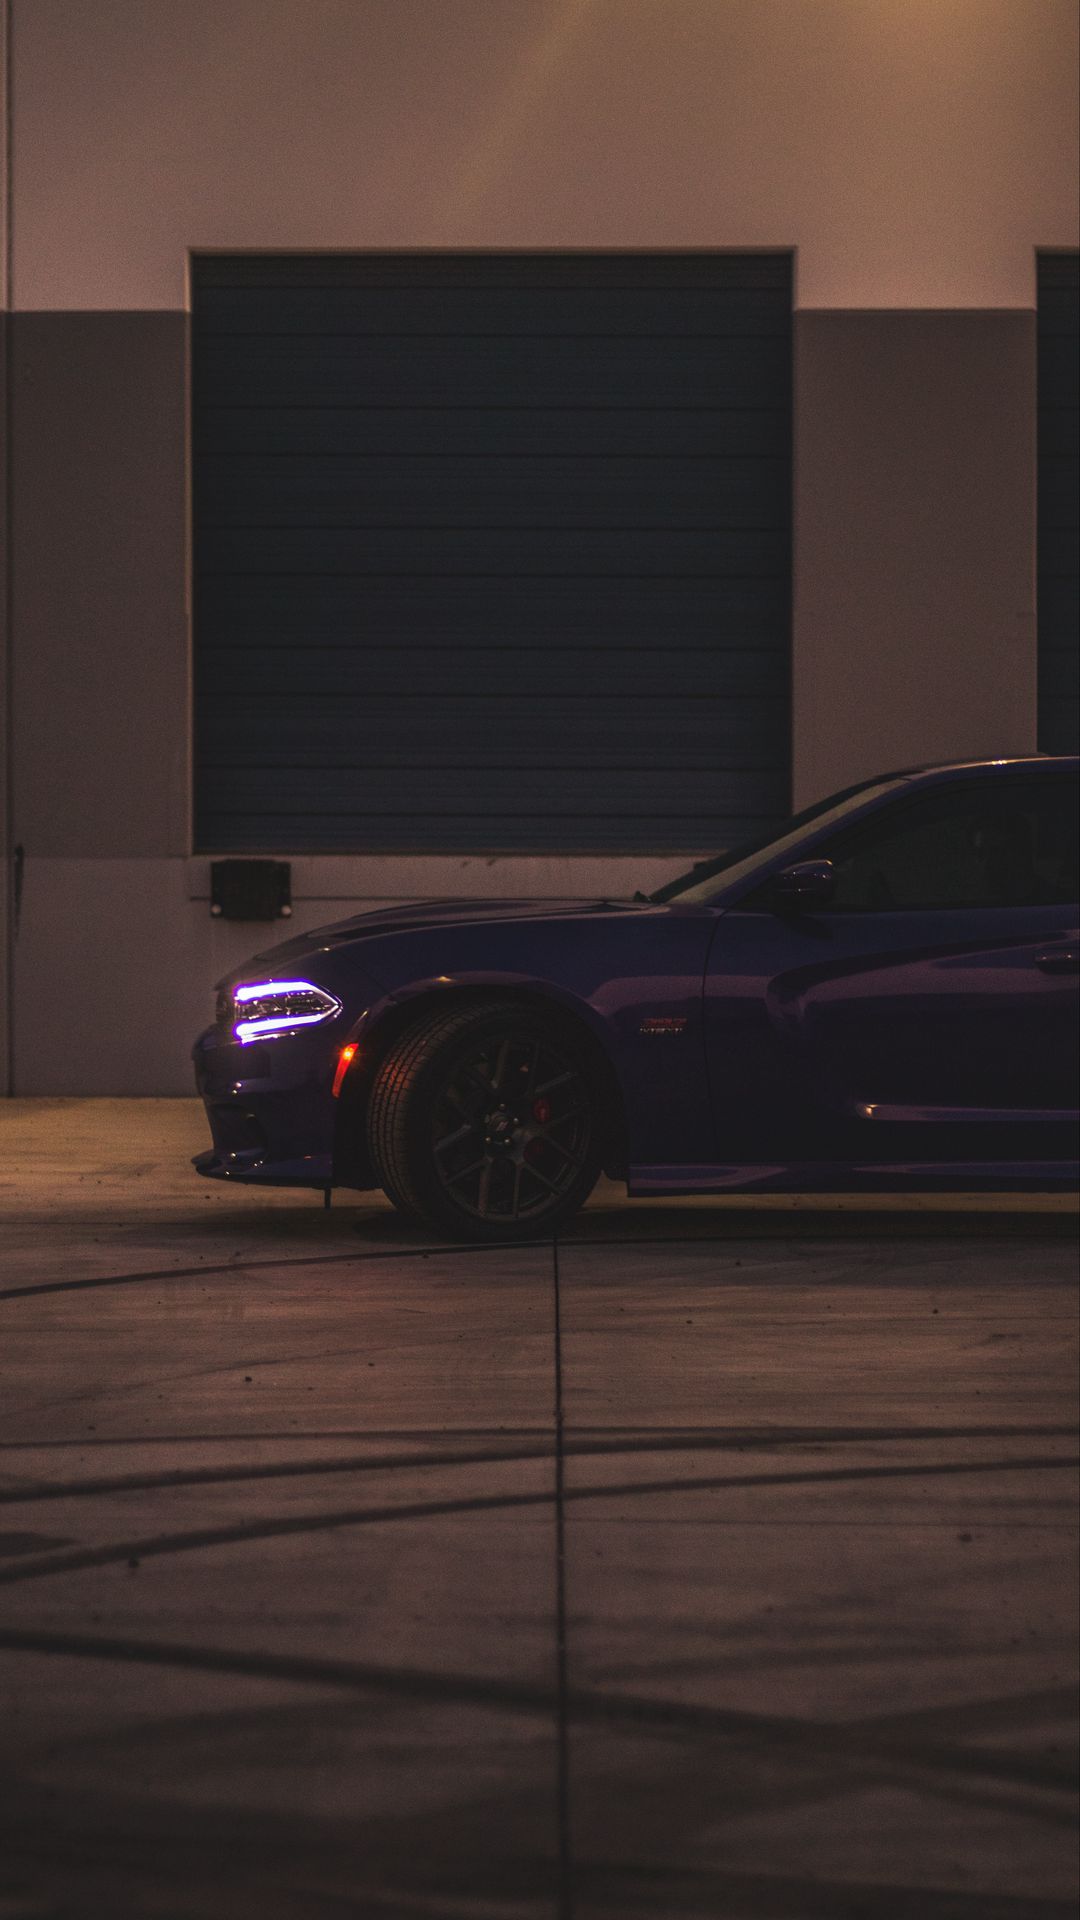 2020 Dodge Charger SRT Hellcat Widebody Phone Wallpaper 004  WSupercars